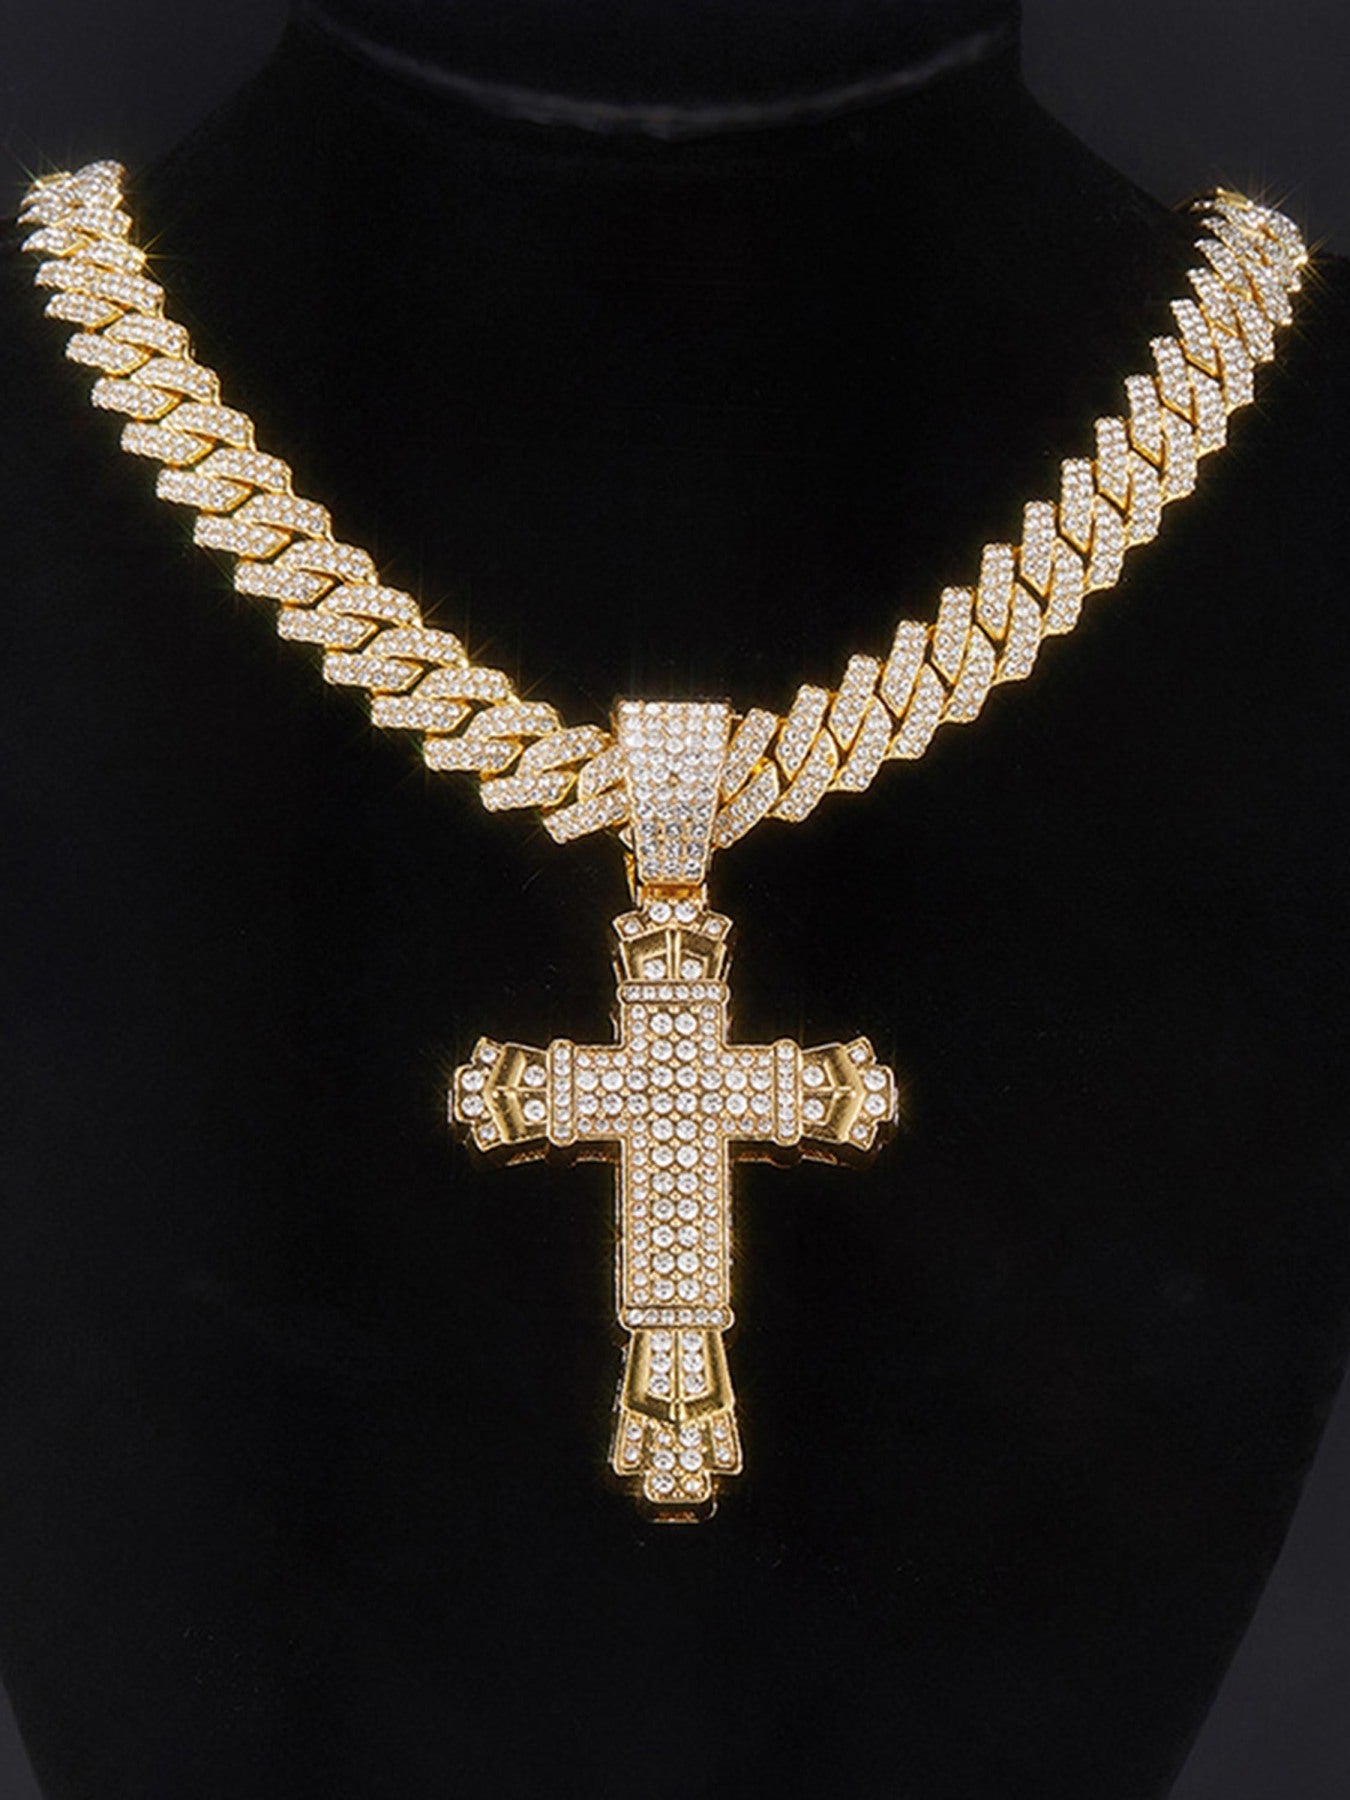 The Supermade Diamond Large Cross Necklace